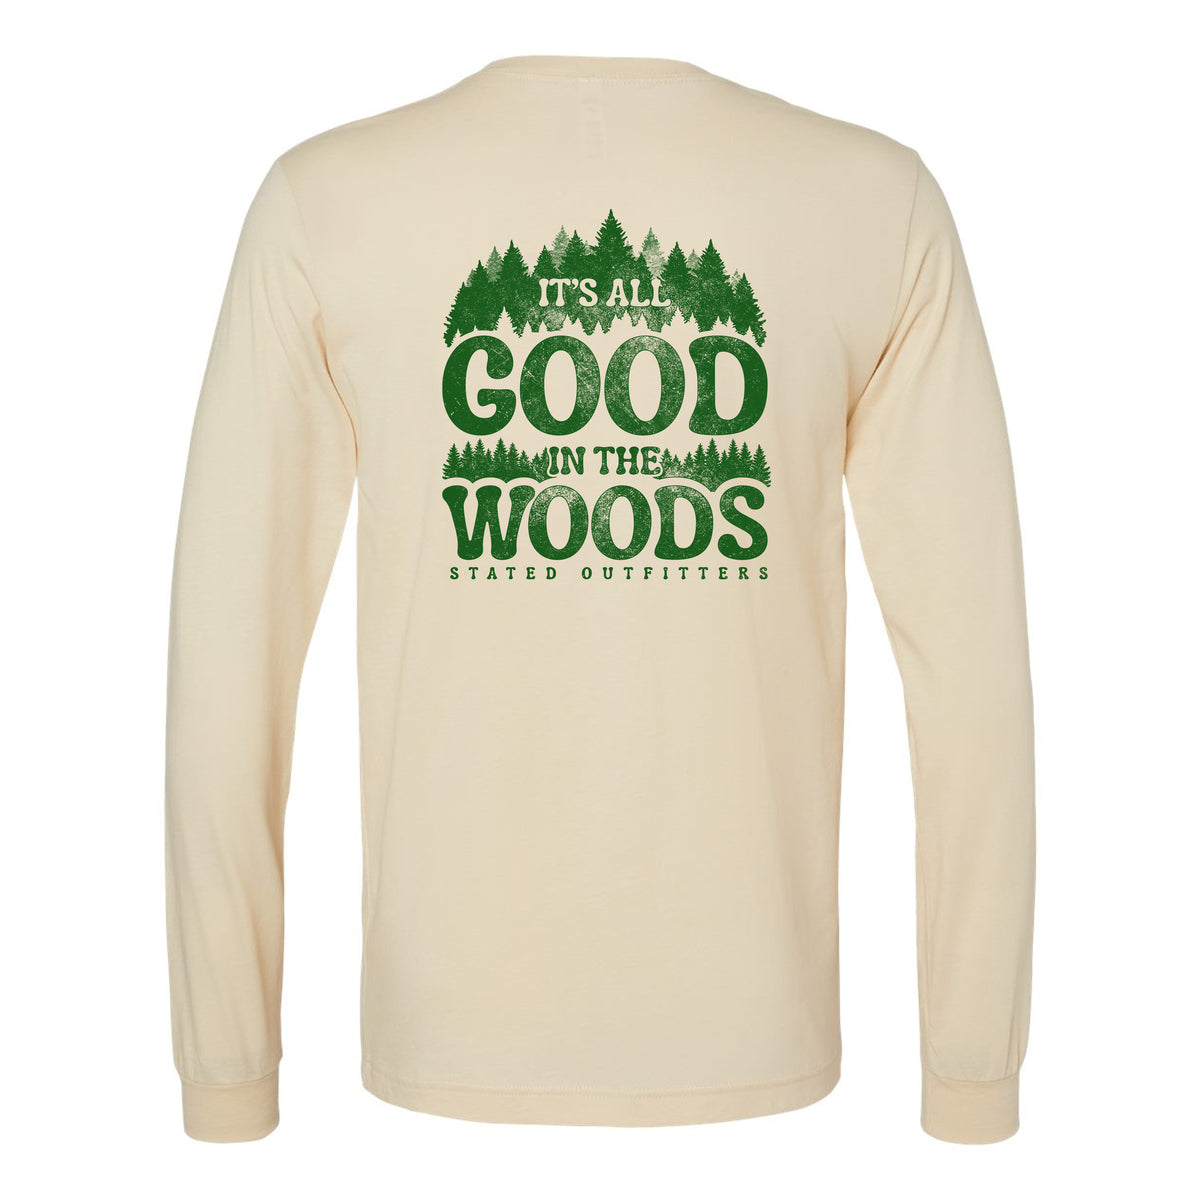 Stated Outfitters All Good In The Woods Long Sleeve Shirt